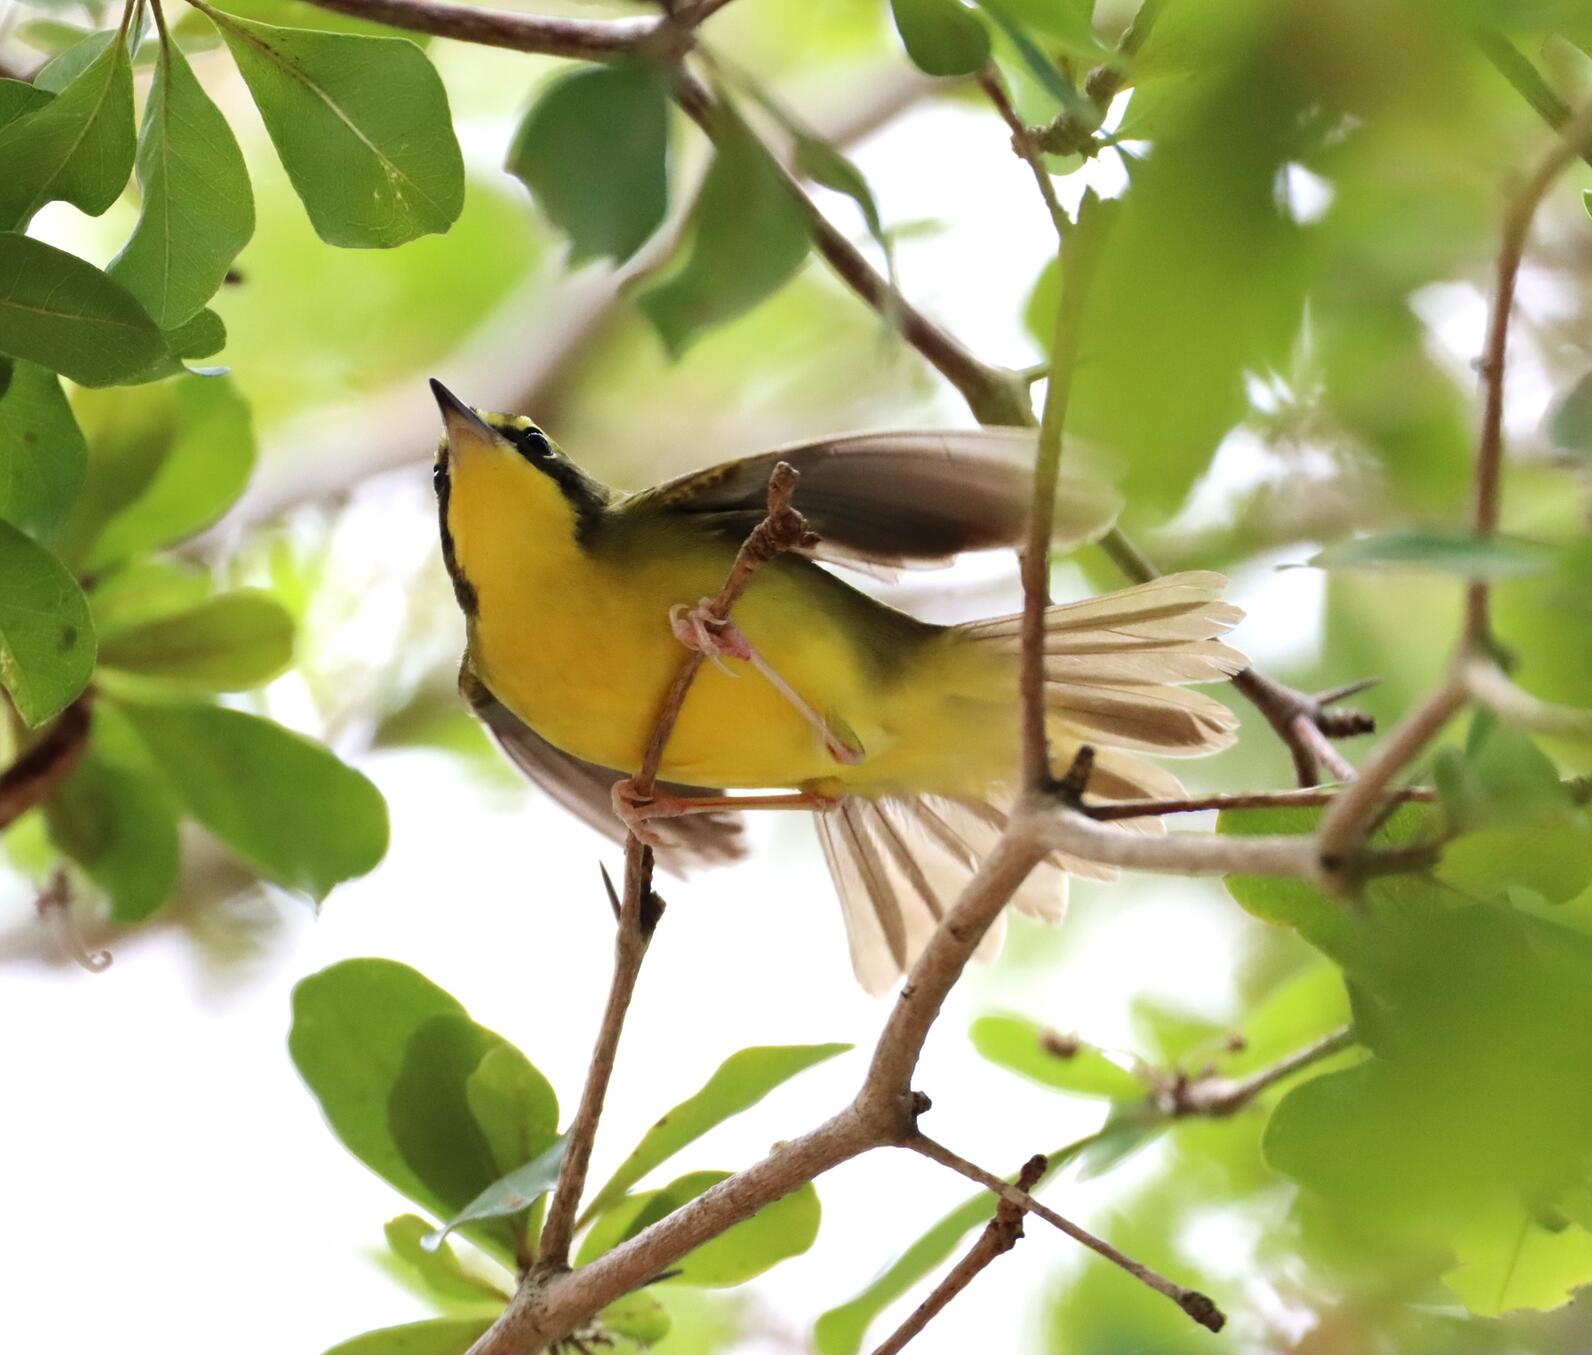 A yellow bird with wings outstretched in a treetop.